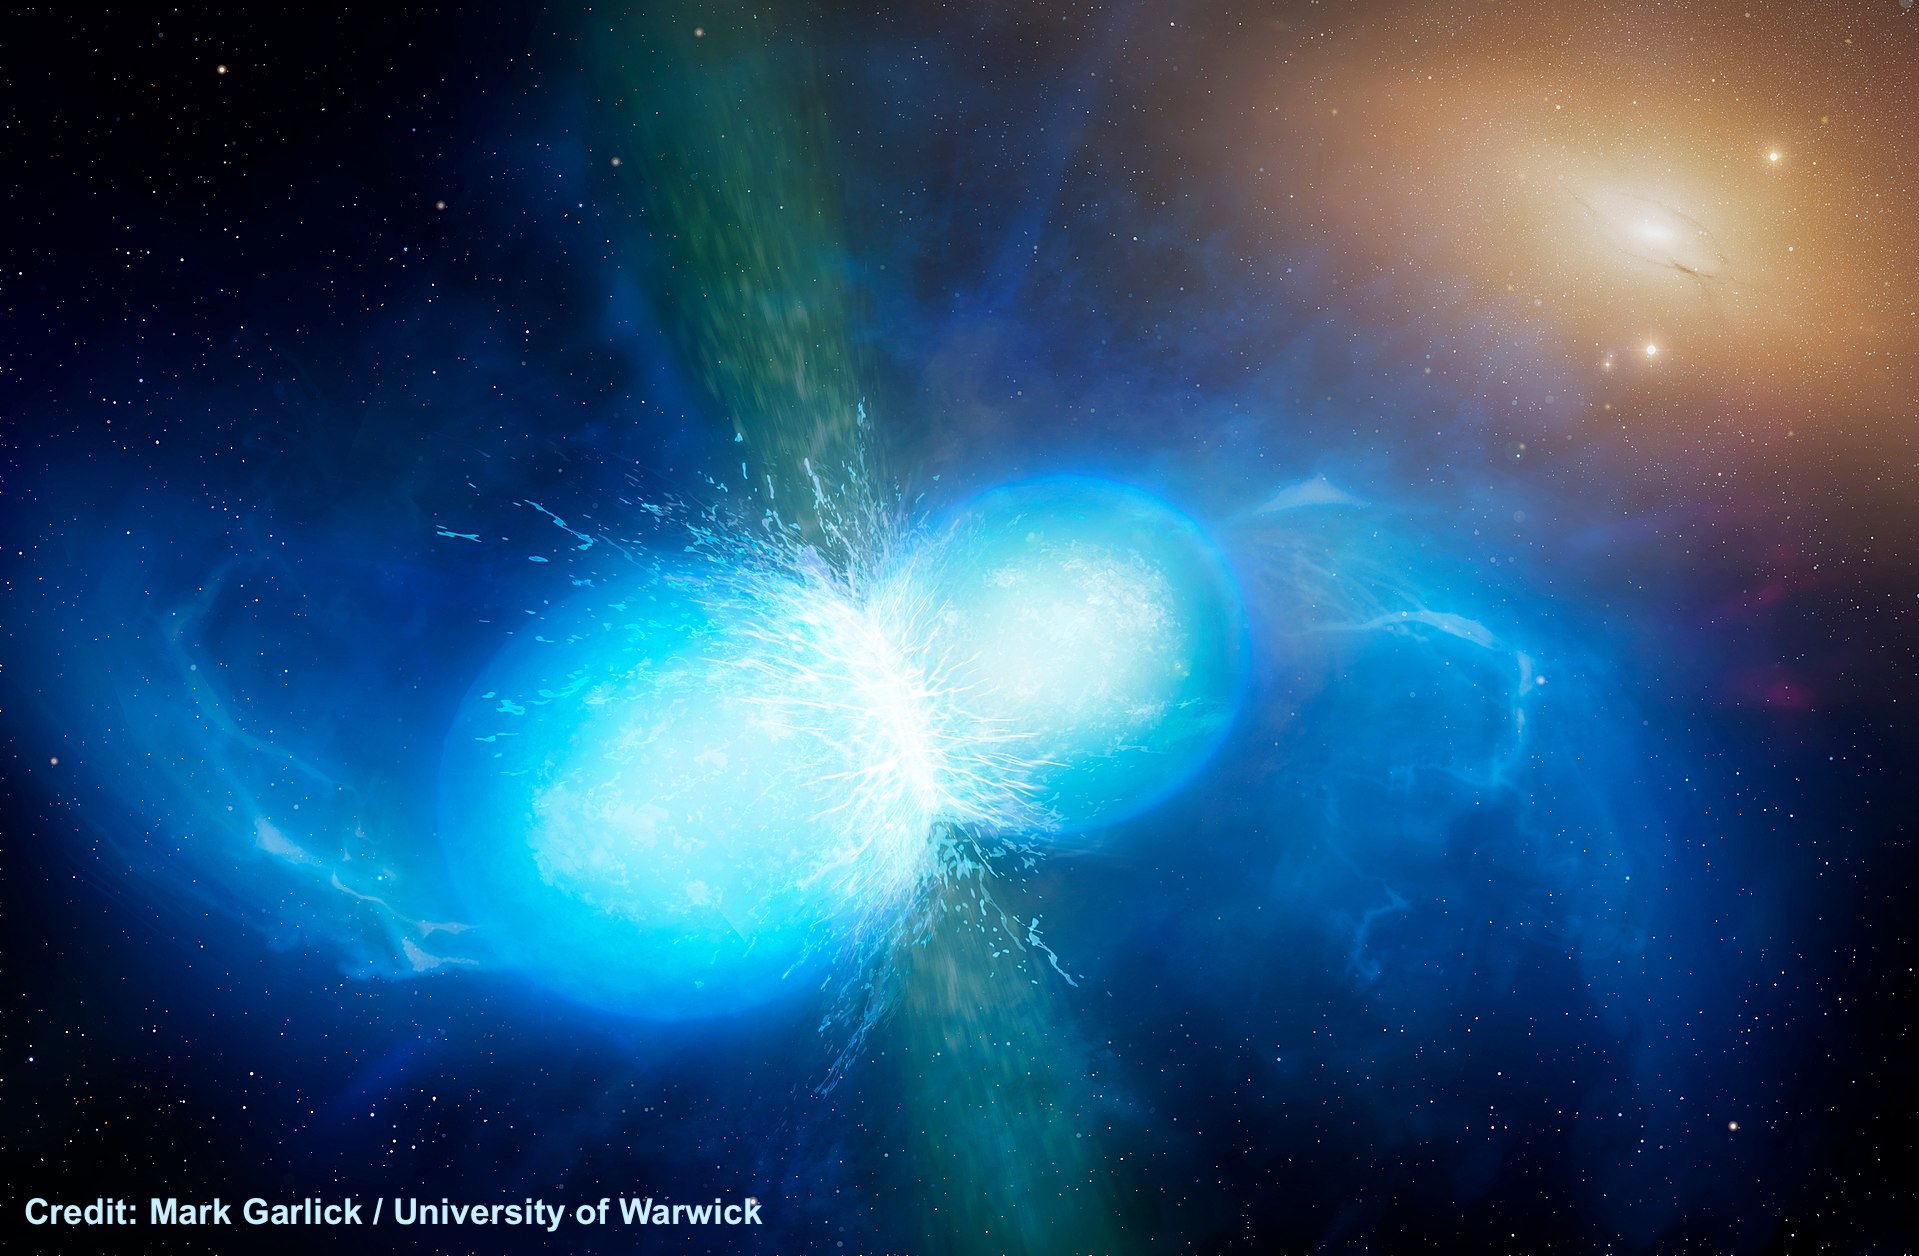 This artist’s impression shows two tiny but very dense neutron stars at the point at which they merge and explode as a kilonova. Such a very rare event is expected to produce both gravitational waves and a short gamma-ray burst, both of which were observed on 17 August 2017 by LIGO–Virgo and Fermi/INTEGRAL respectively. Subsequent detailed observations with many ESO telescopes confirmed that this object, seen in the galaxy NGC 4993 about 130 million light-years from the Earth, is indeed a kilonova. Such objects are the main source of very heavy chemical elements, such as gold and platinum, in the Universe.